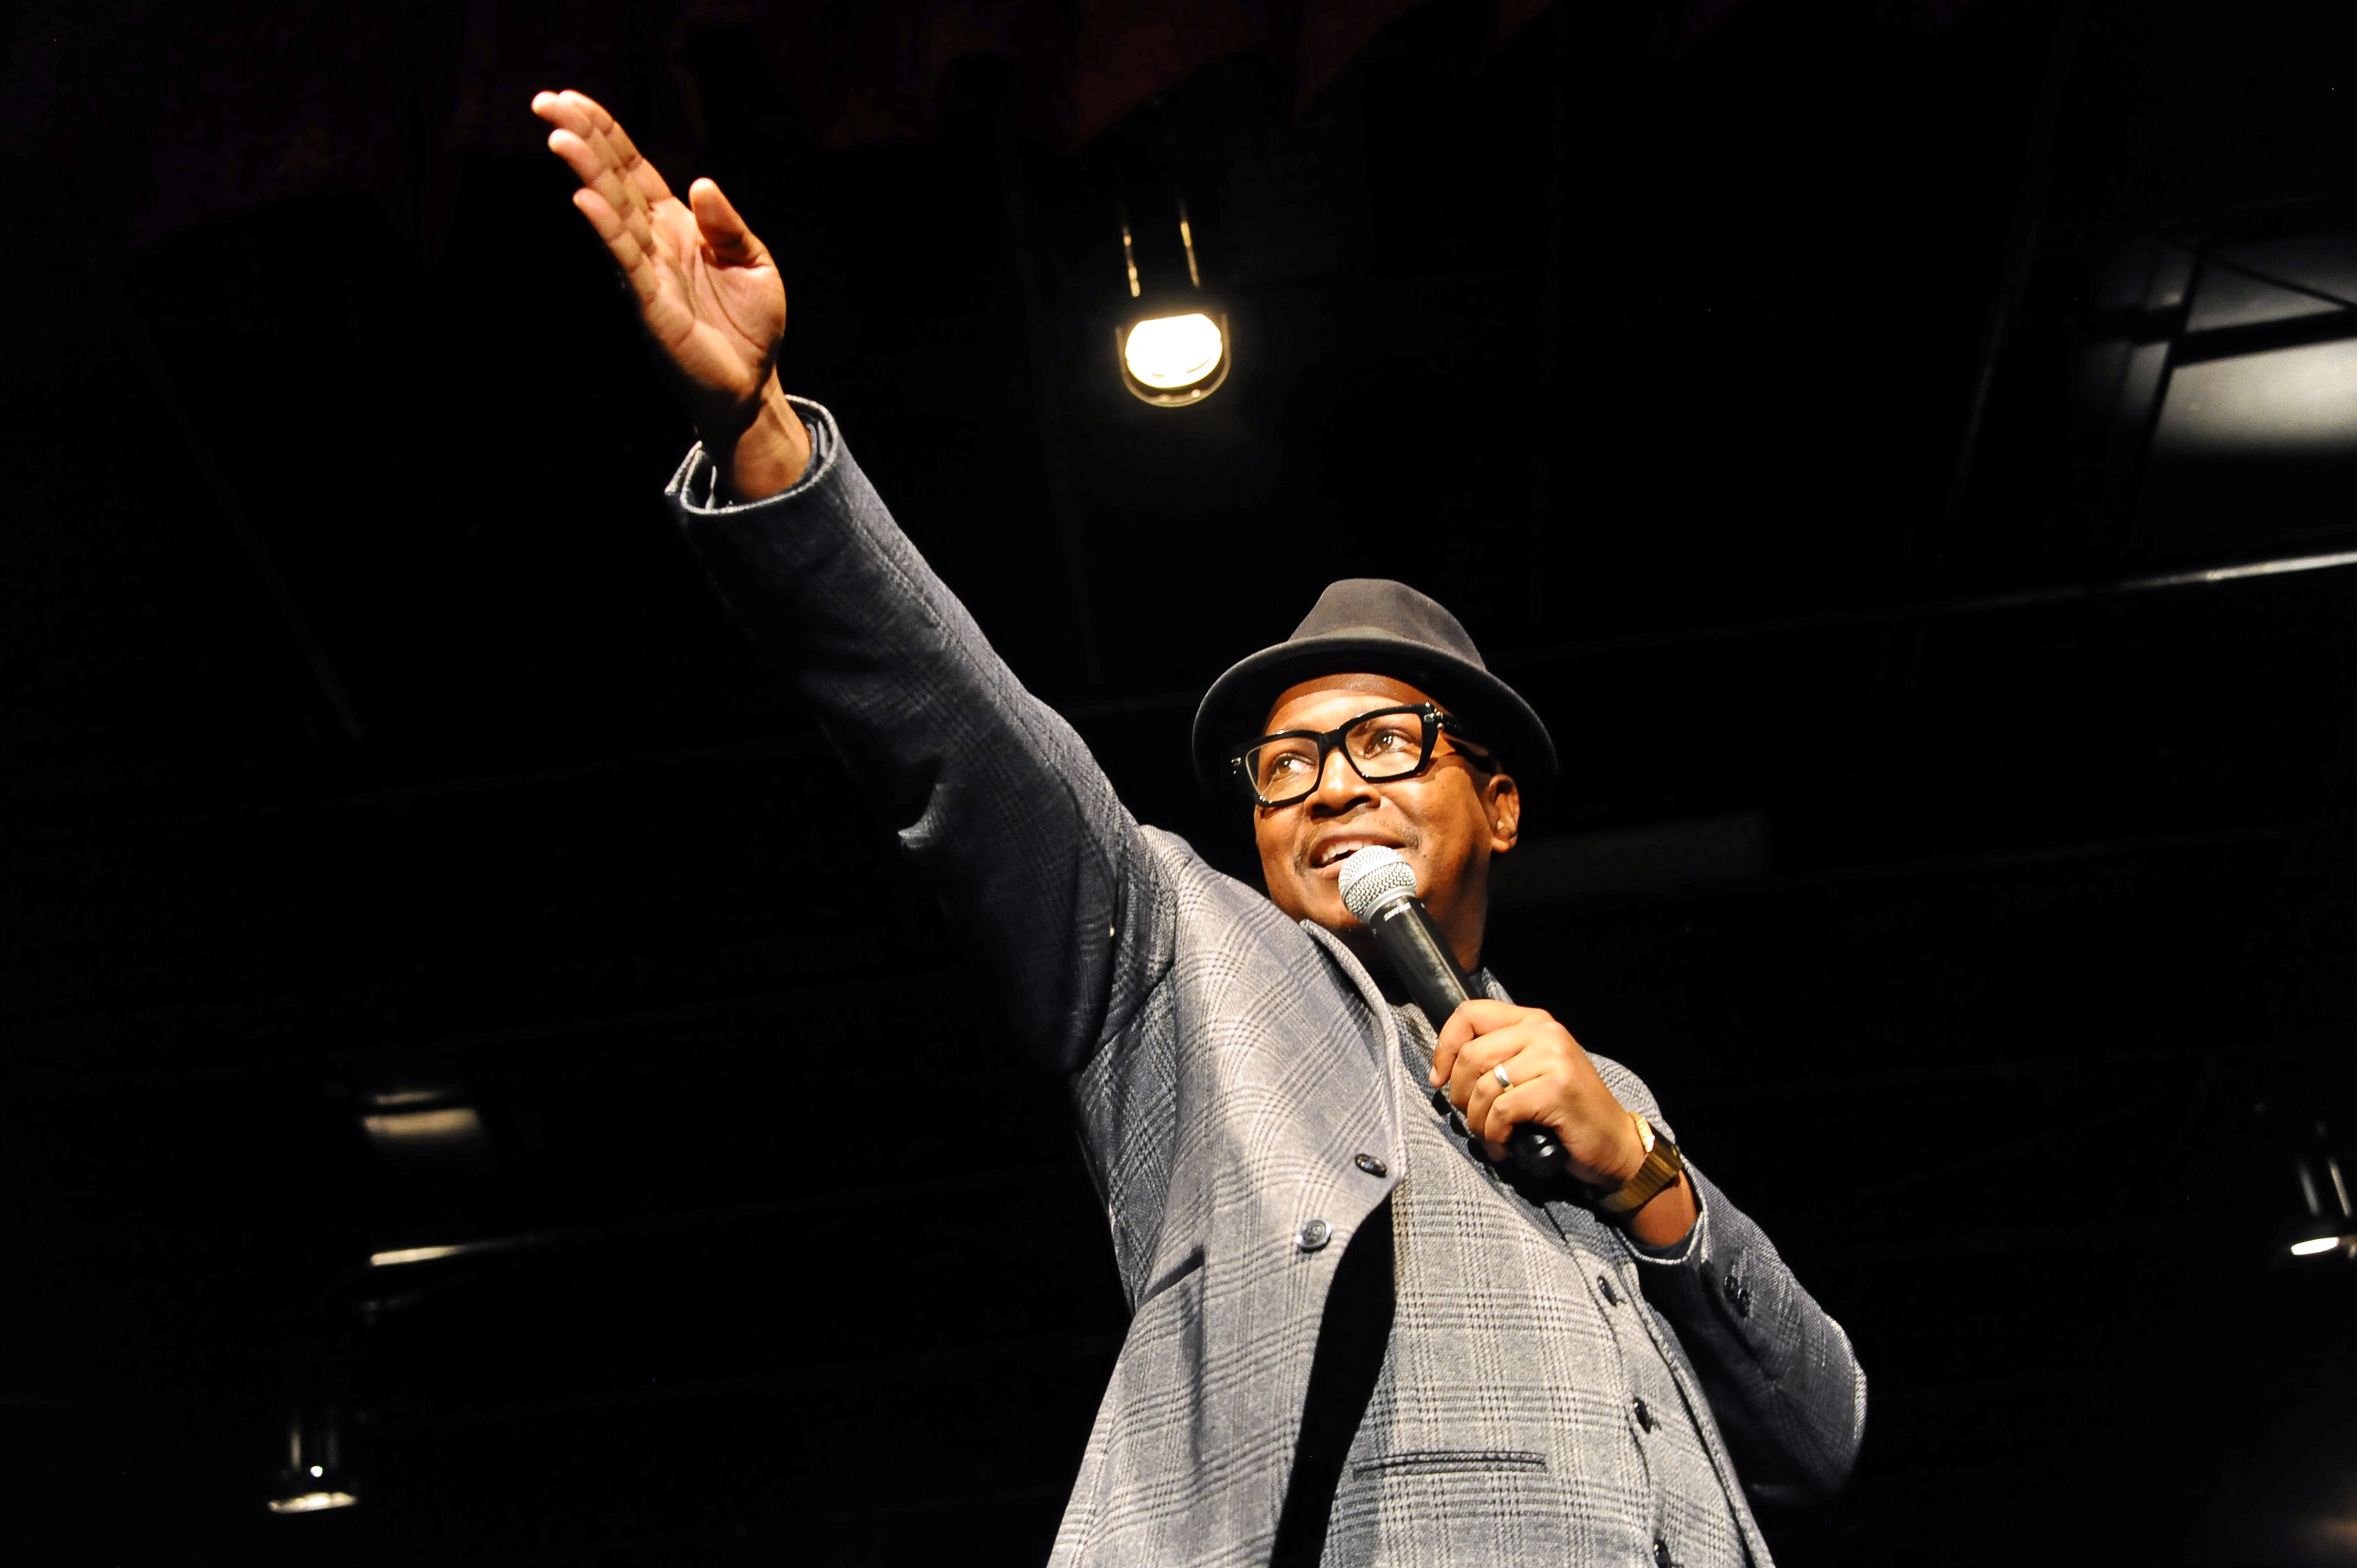 SANDTON, SOUTH AFRICA - JULY 24: Ndumiso Lindi during 'Boys Don't Cry In July' official opening night at Auto & General Theatre on the Square on July 24, 2019 in Sandton, South Africa. Comedian Ndumiso Lindi dedicates the show to his father, his life and times and is a personal comedy story that takes the audience on a laugh-a-minute journey through his life, words and wisdom. (Photo by Gallo Images/Oupa Bopape)